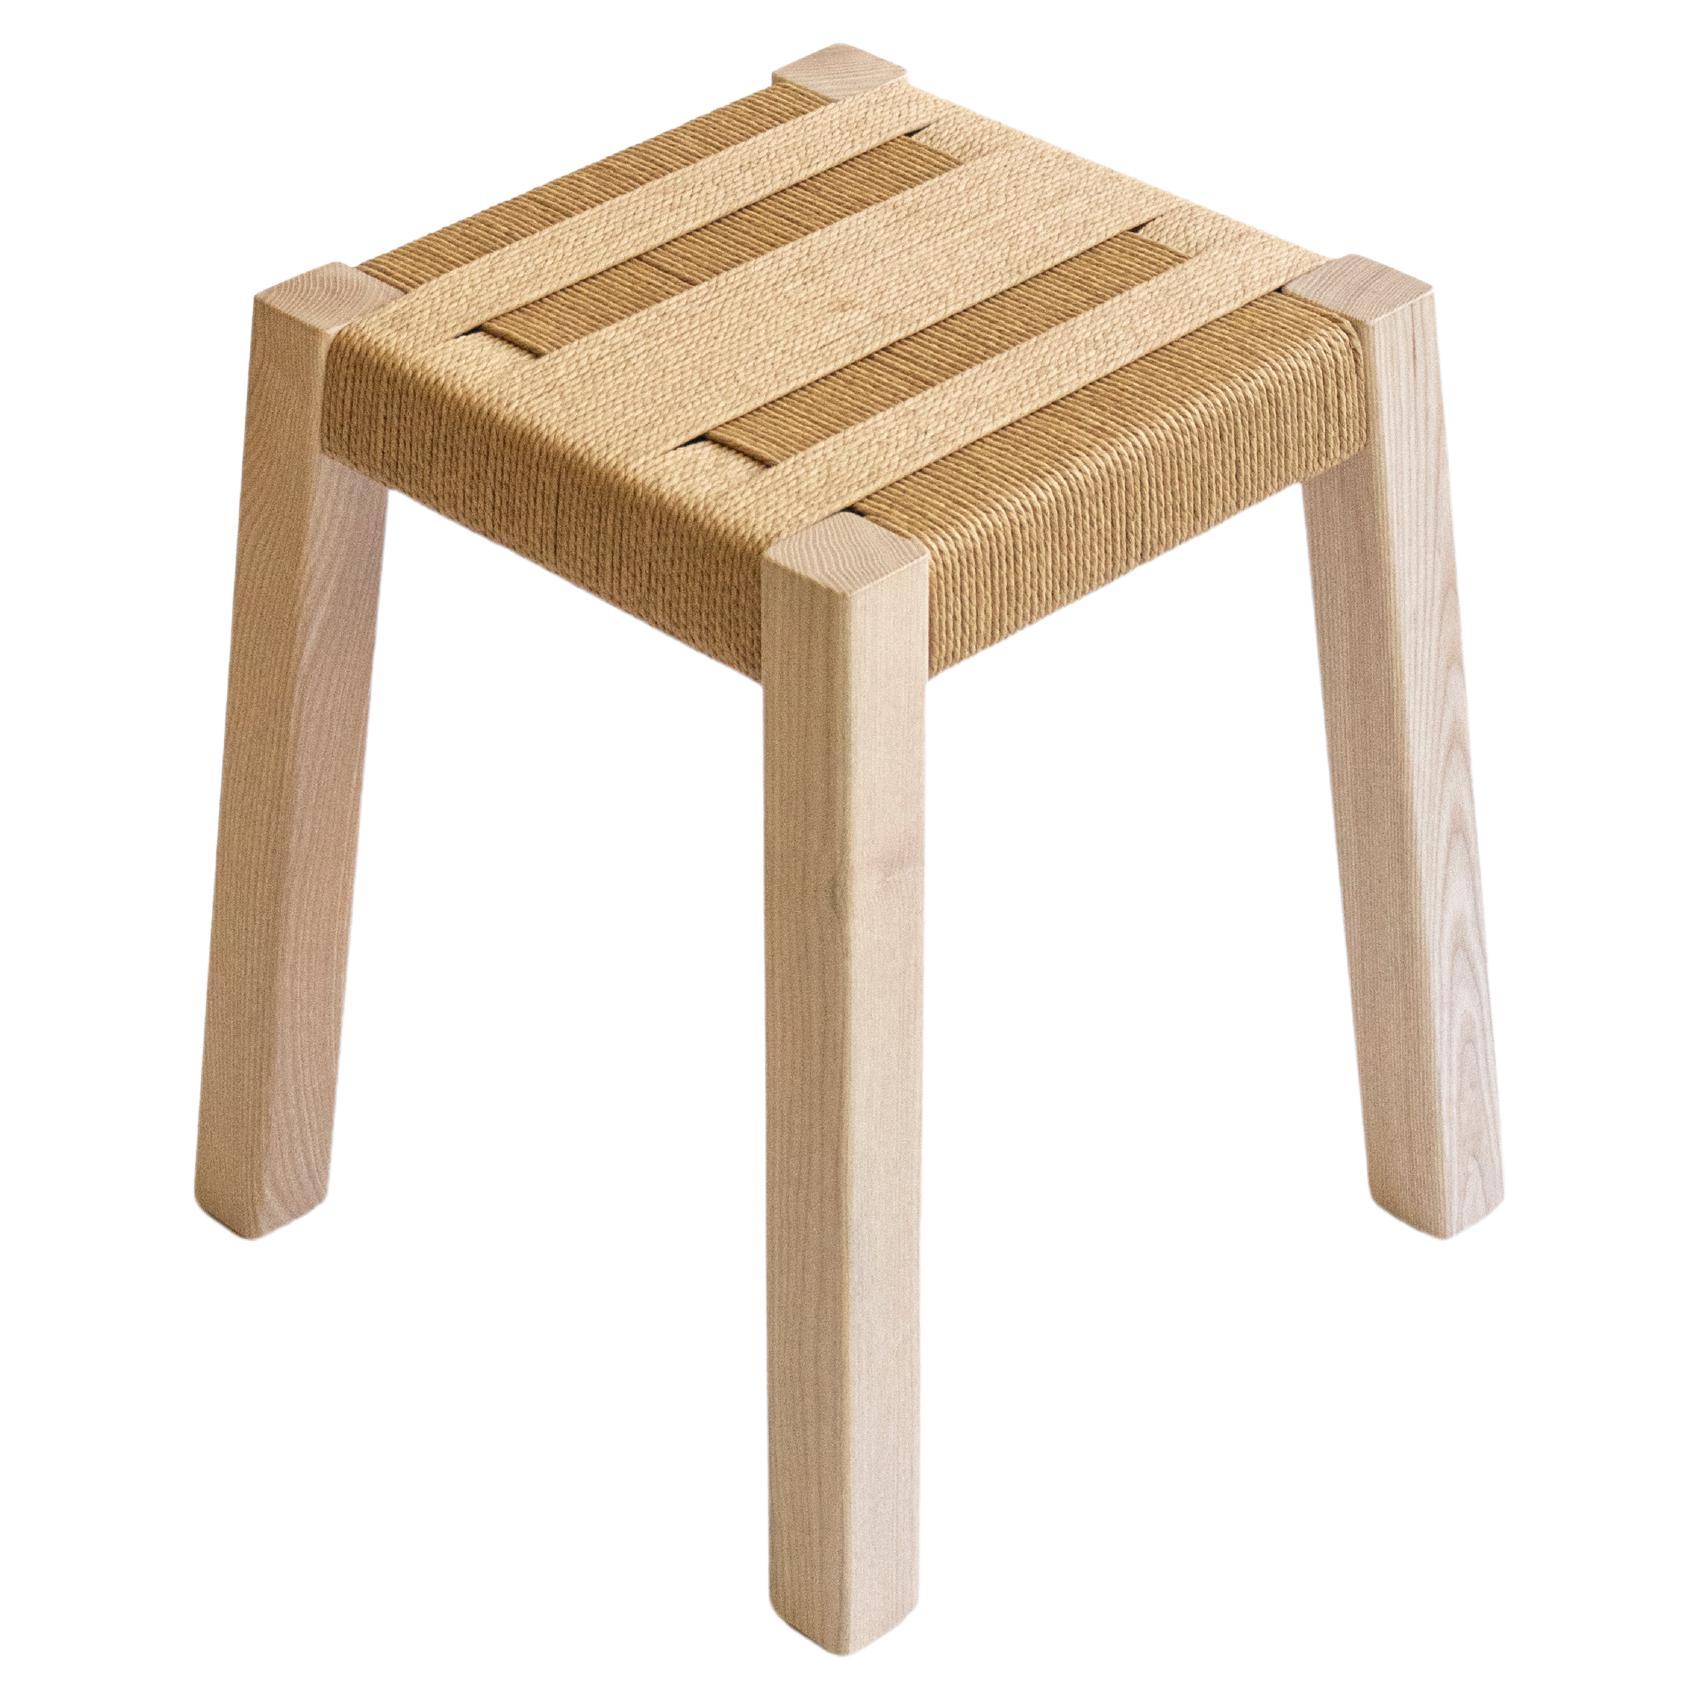 Origin Made The Weaver's Stool in Ash For Sale